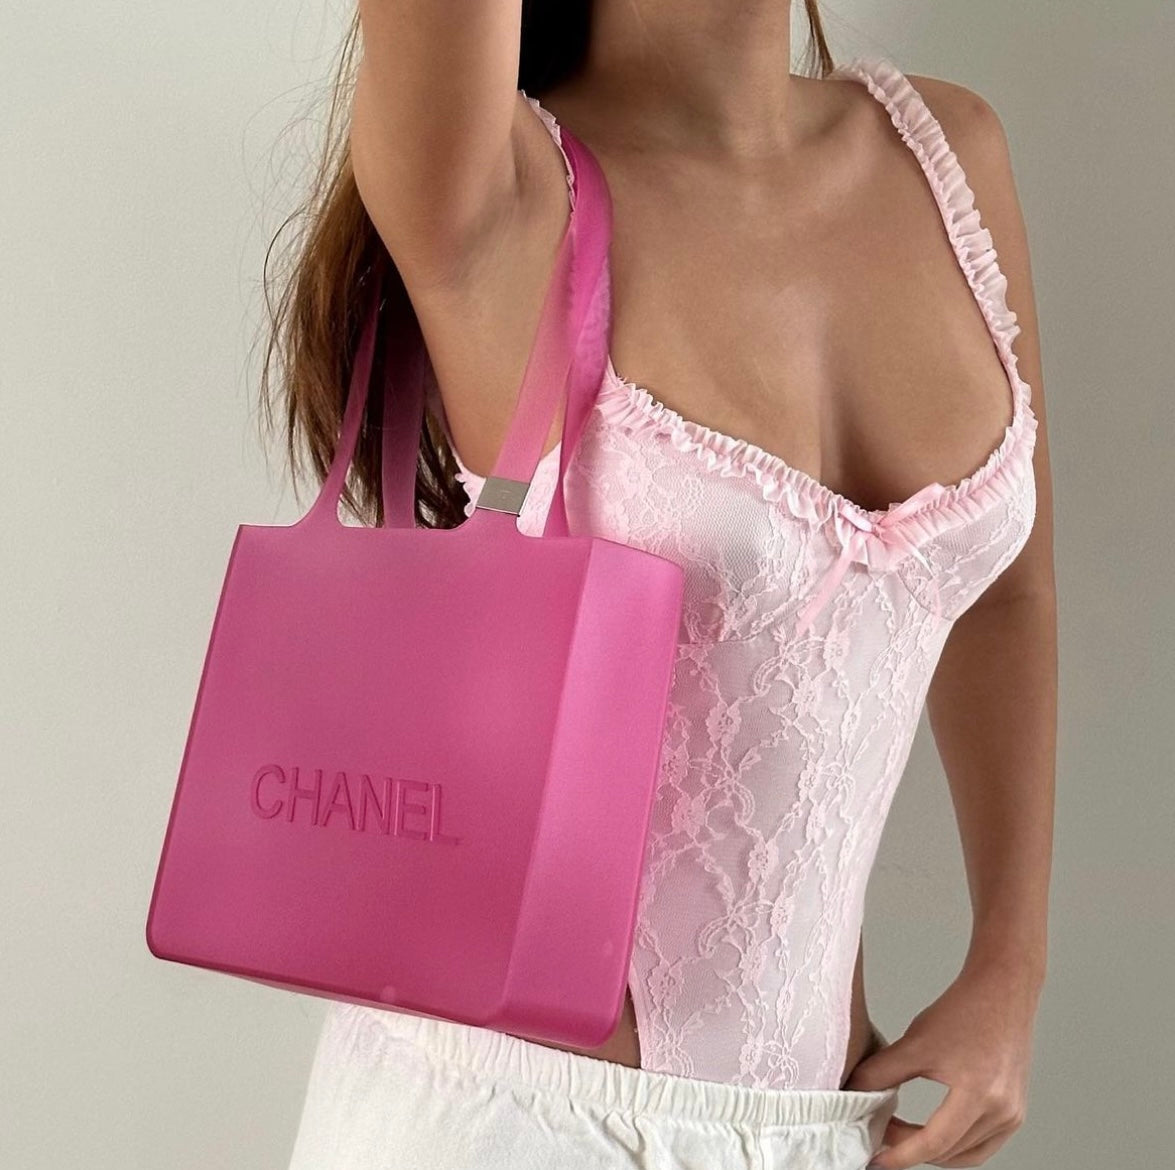 Chanel Pink Jelly Shoulder Tote